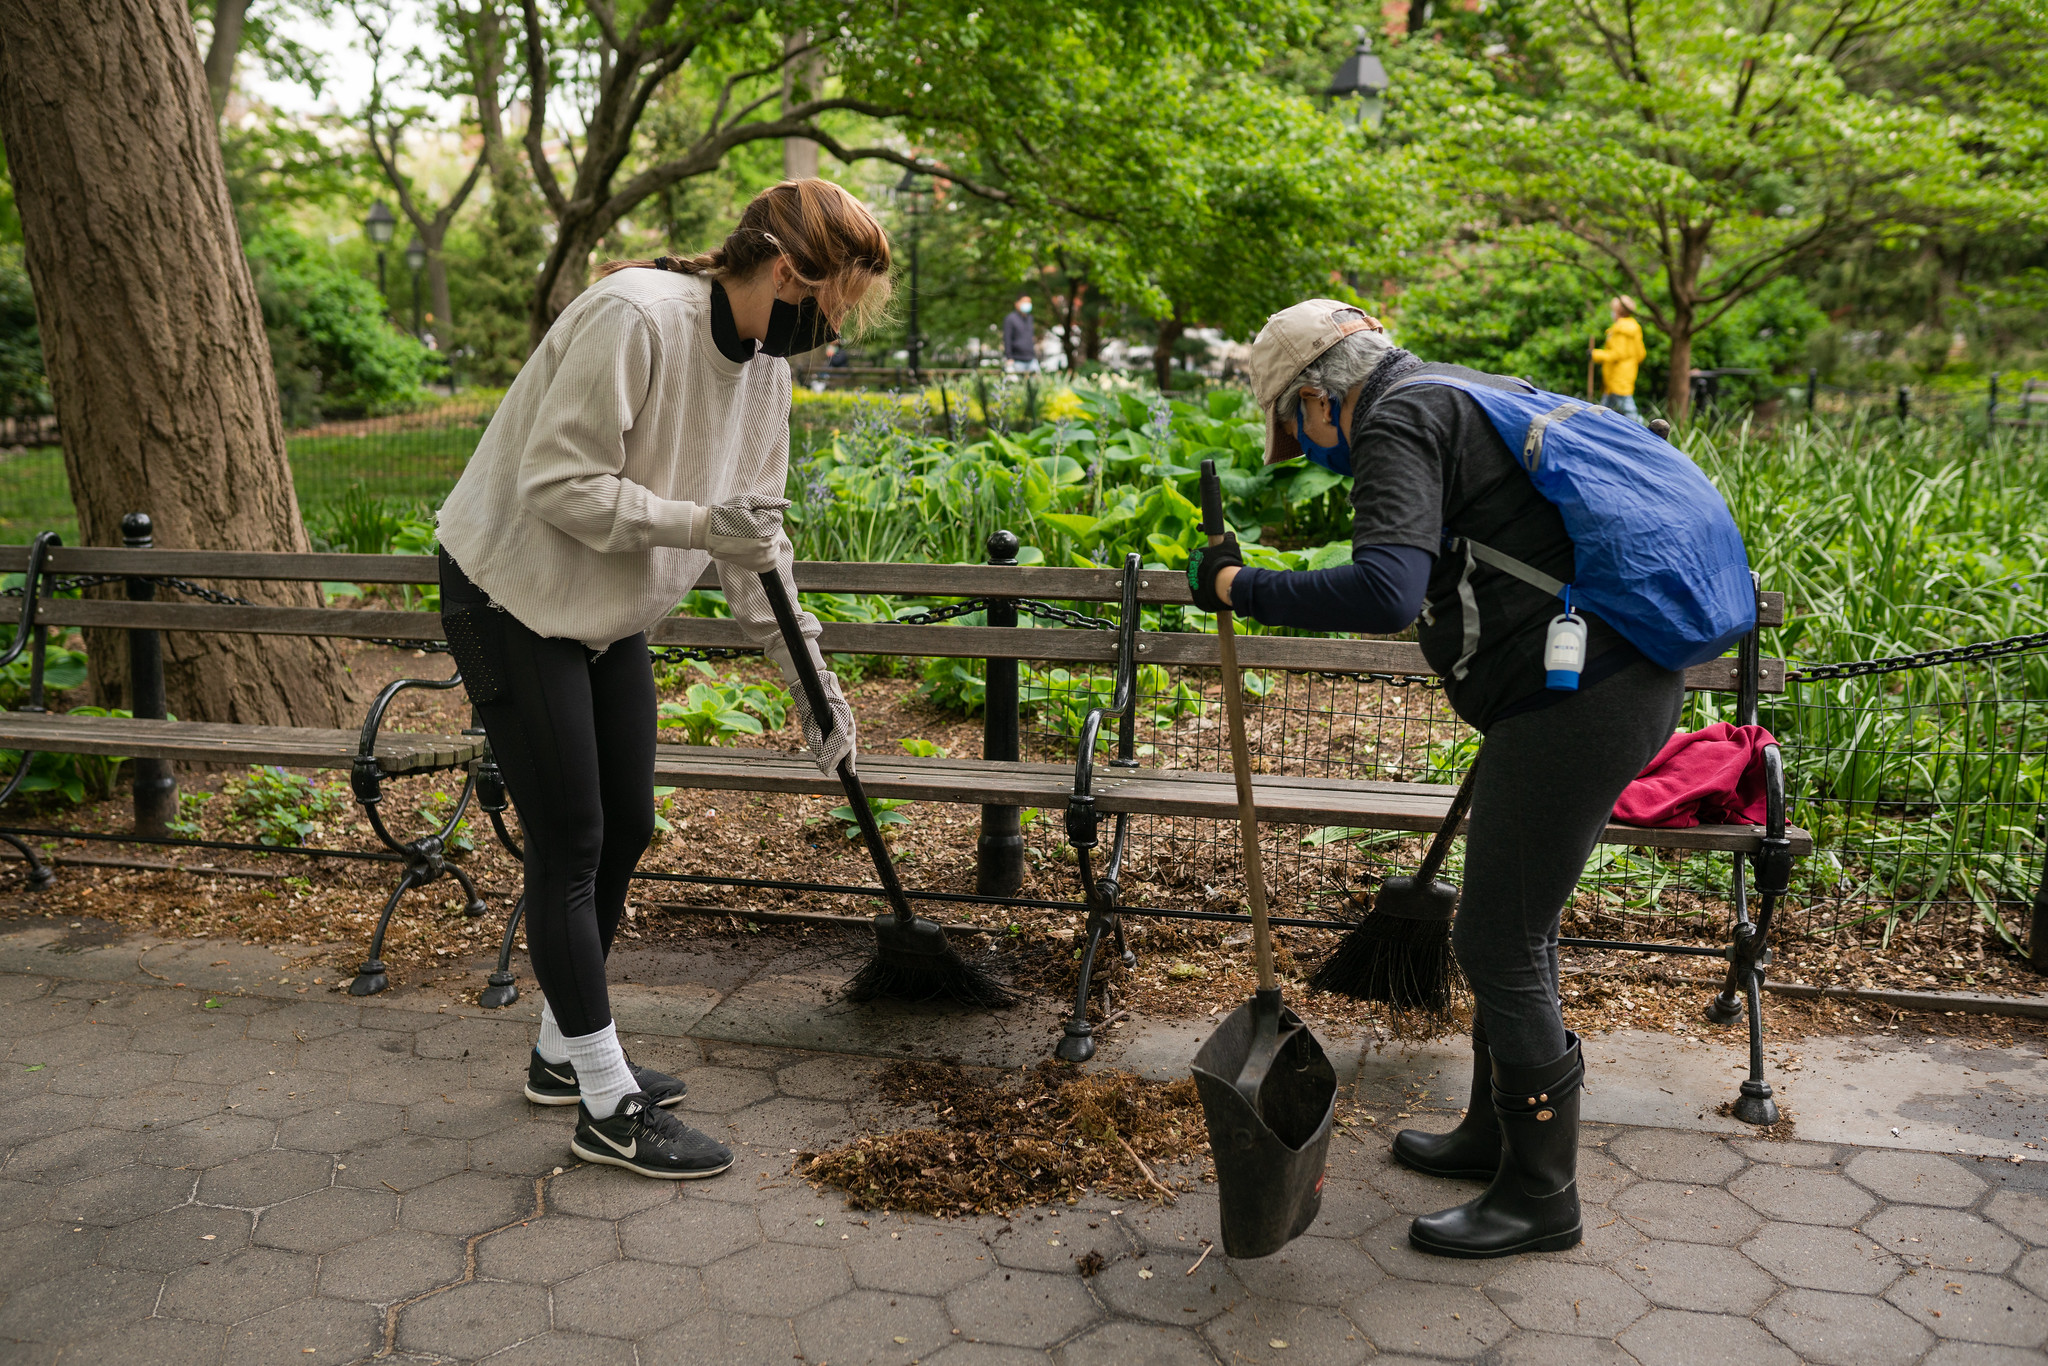 two volunteers sweep dirt off a paved pathway in the park